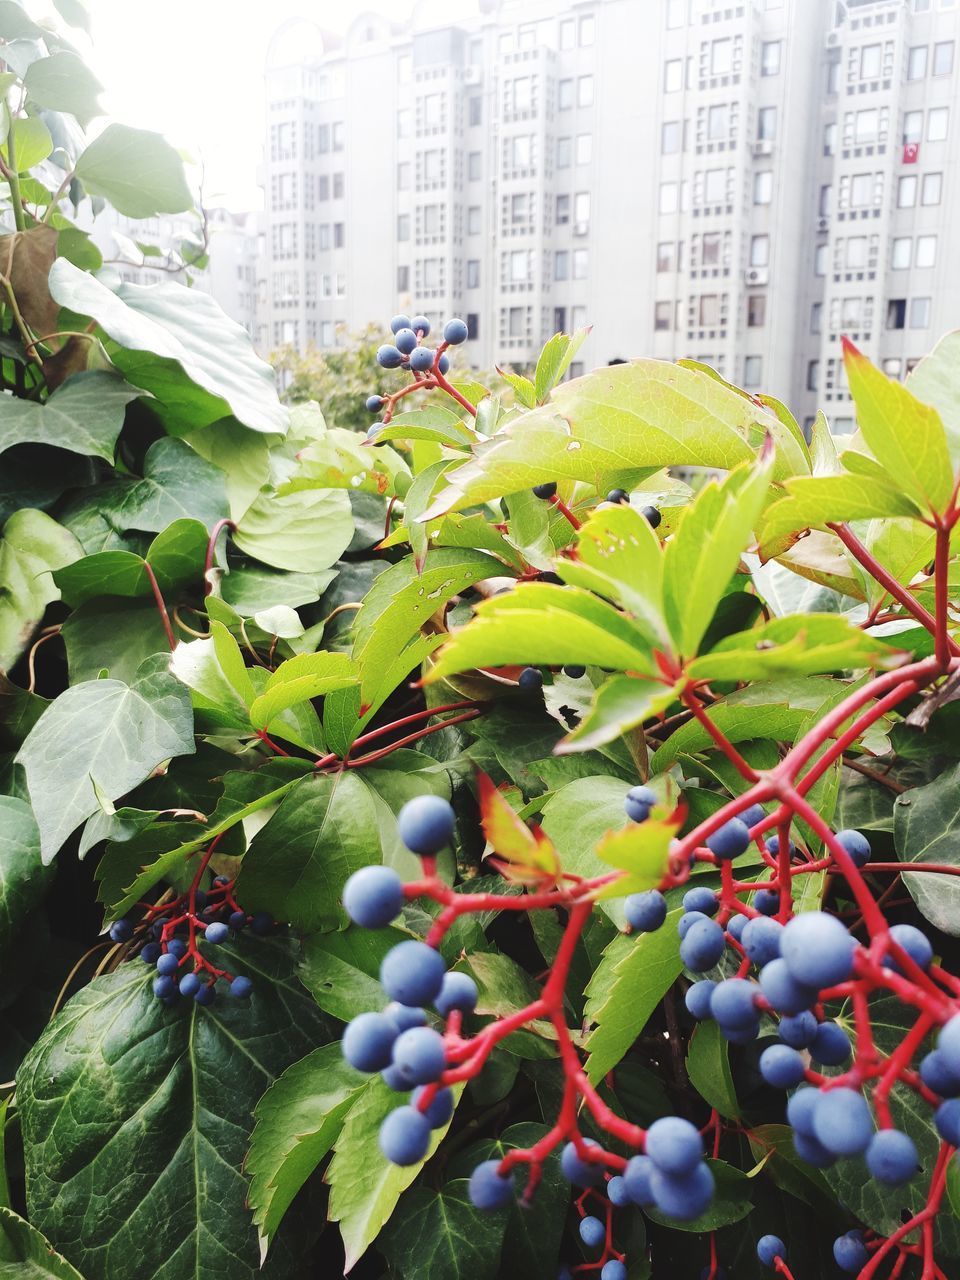 CLOSE-UP OF FRUITS GROWING ON PLANT BY BUILDING